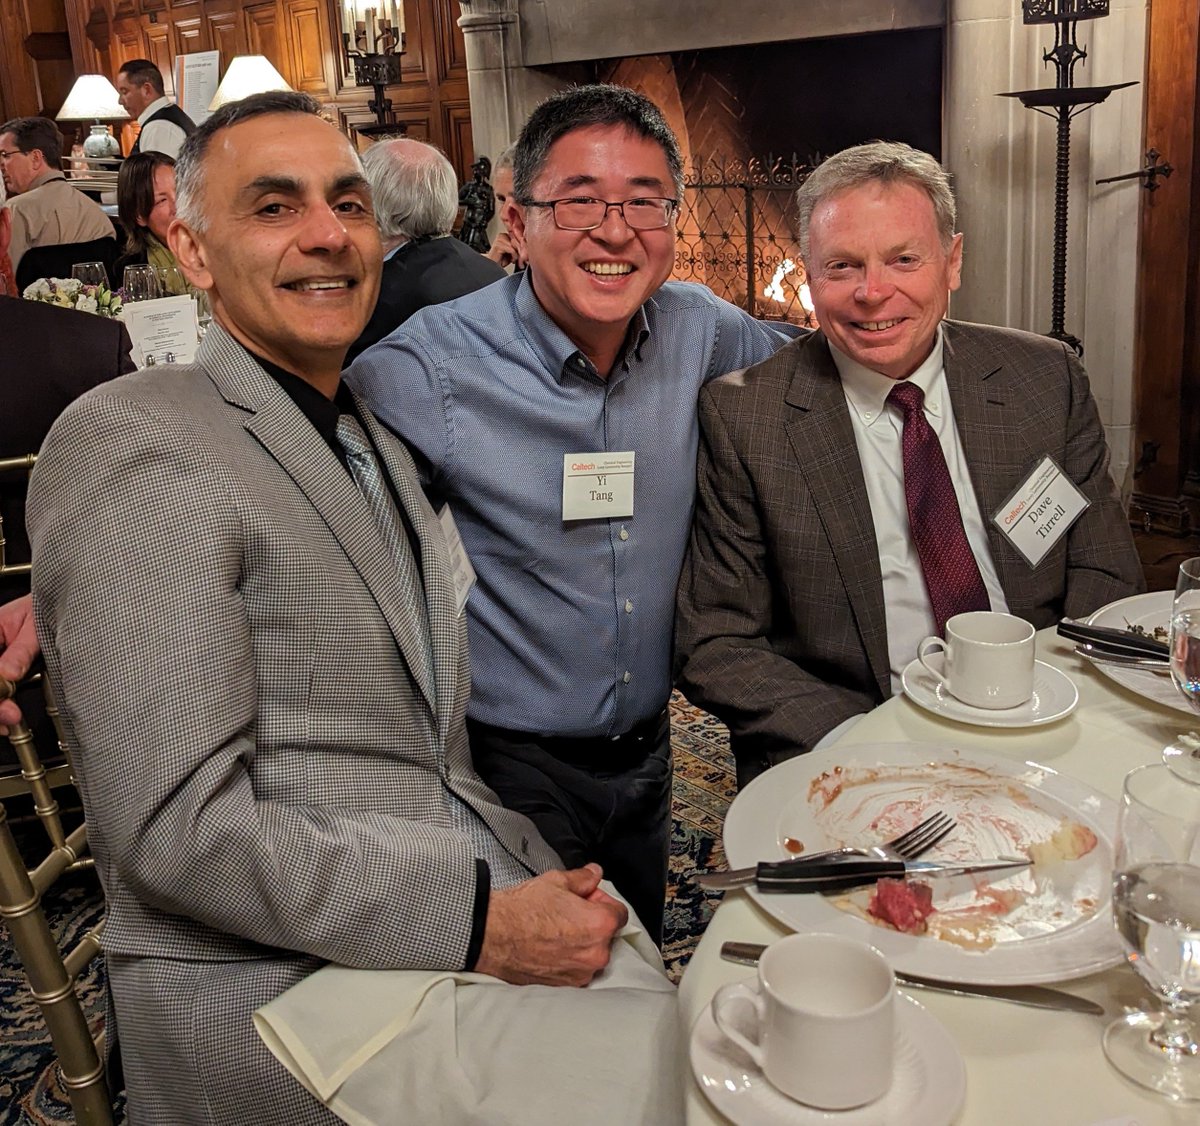 Congrats to Chaitan for receiving the Lacey lectureship at Caltech! So happy to see both of my mentors at the same time. @Stanford_ChEMH @Caltech